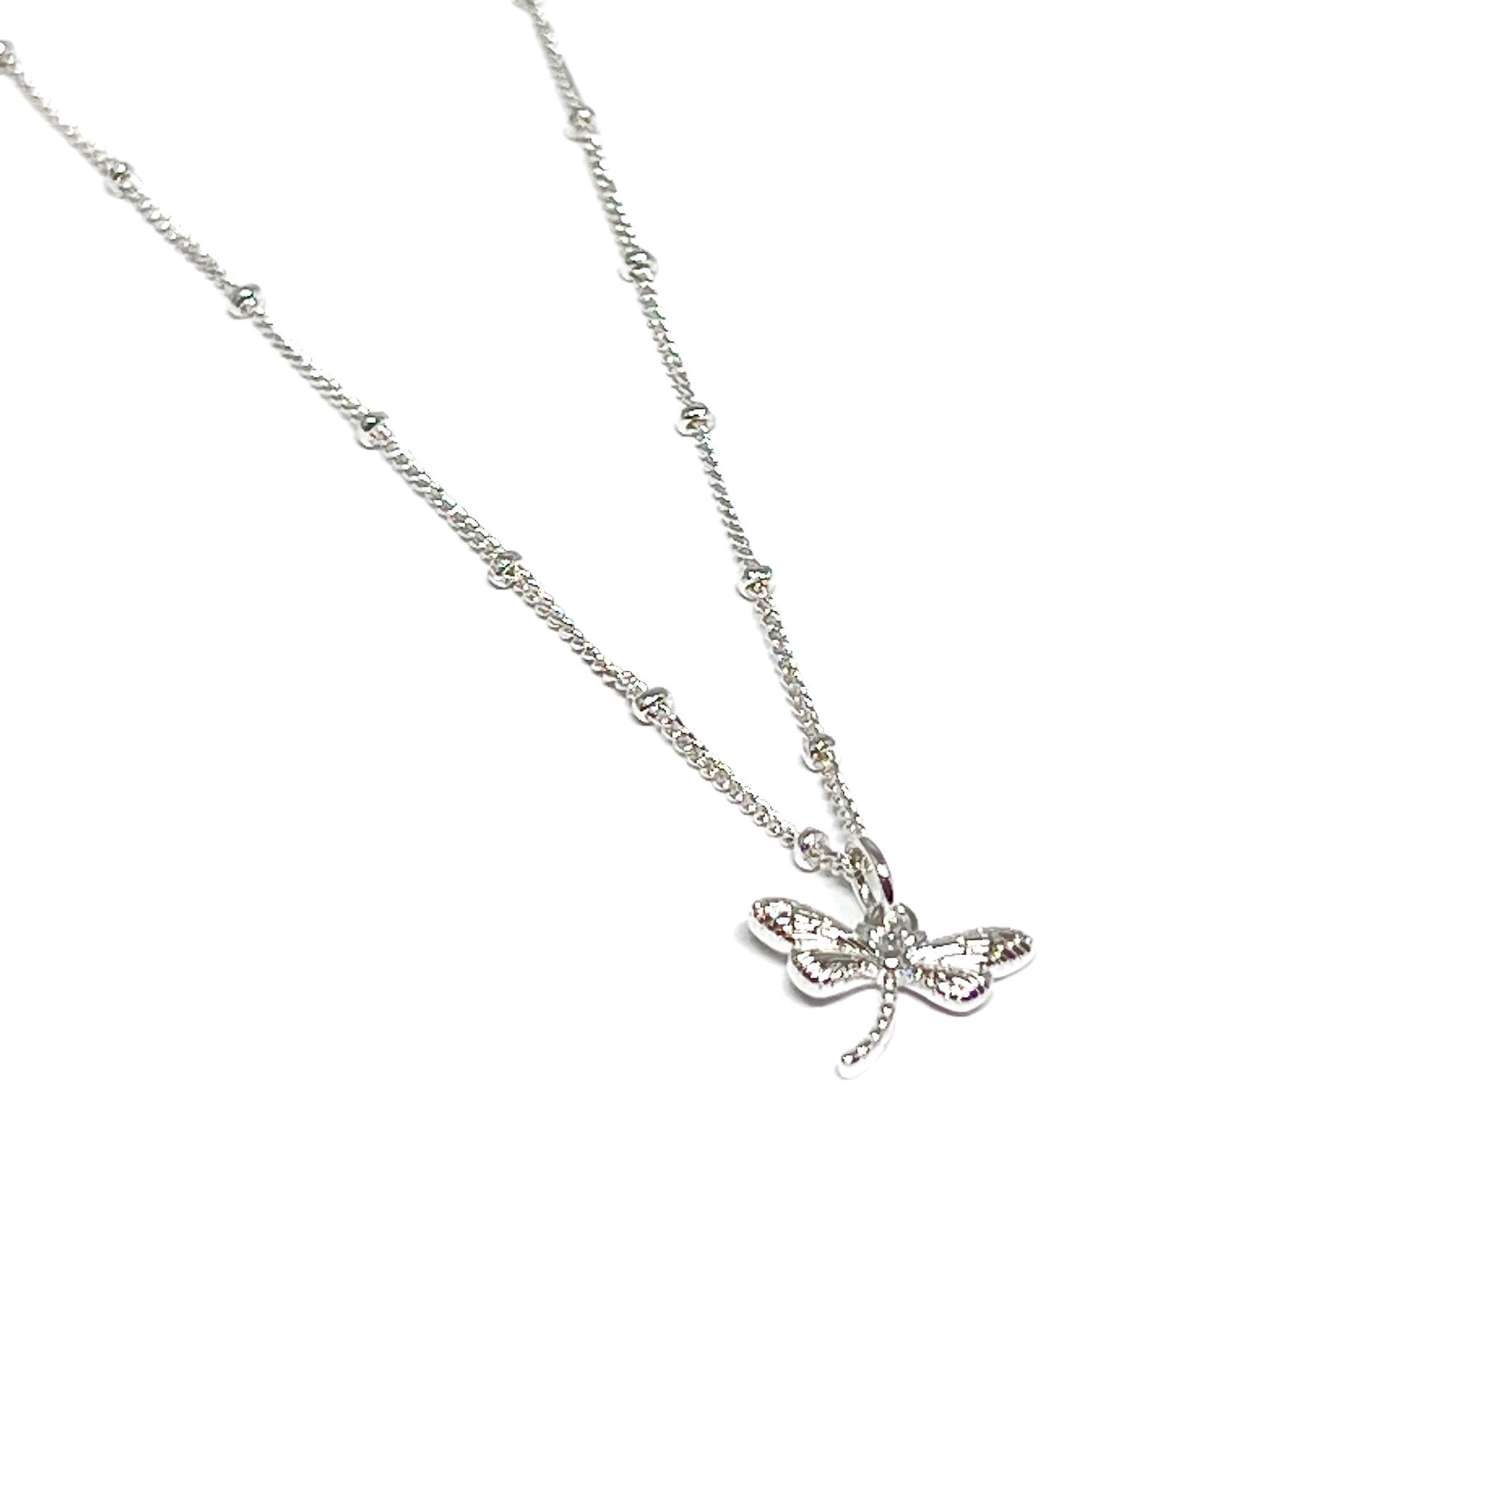 Sierra Dragonfly Necklace - Silver